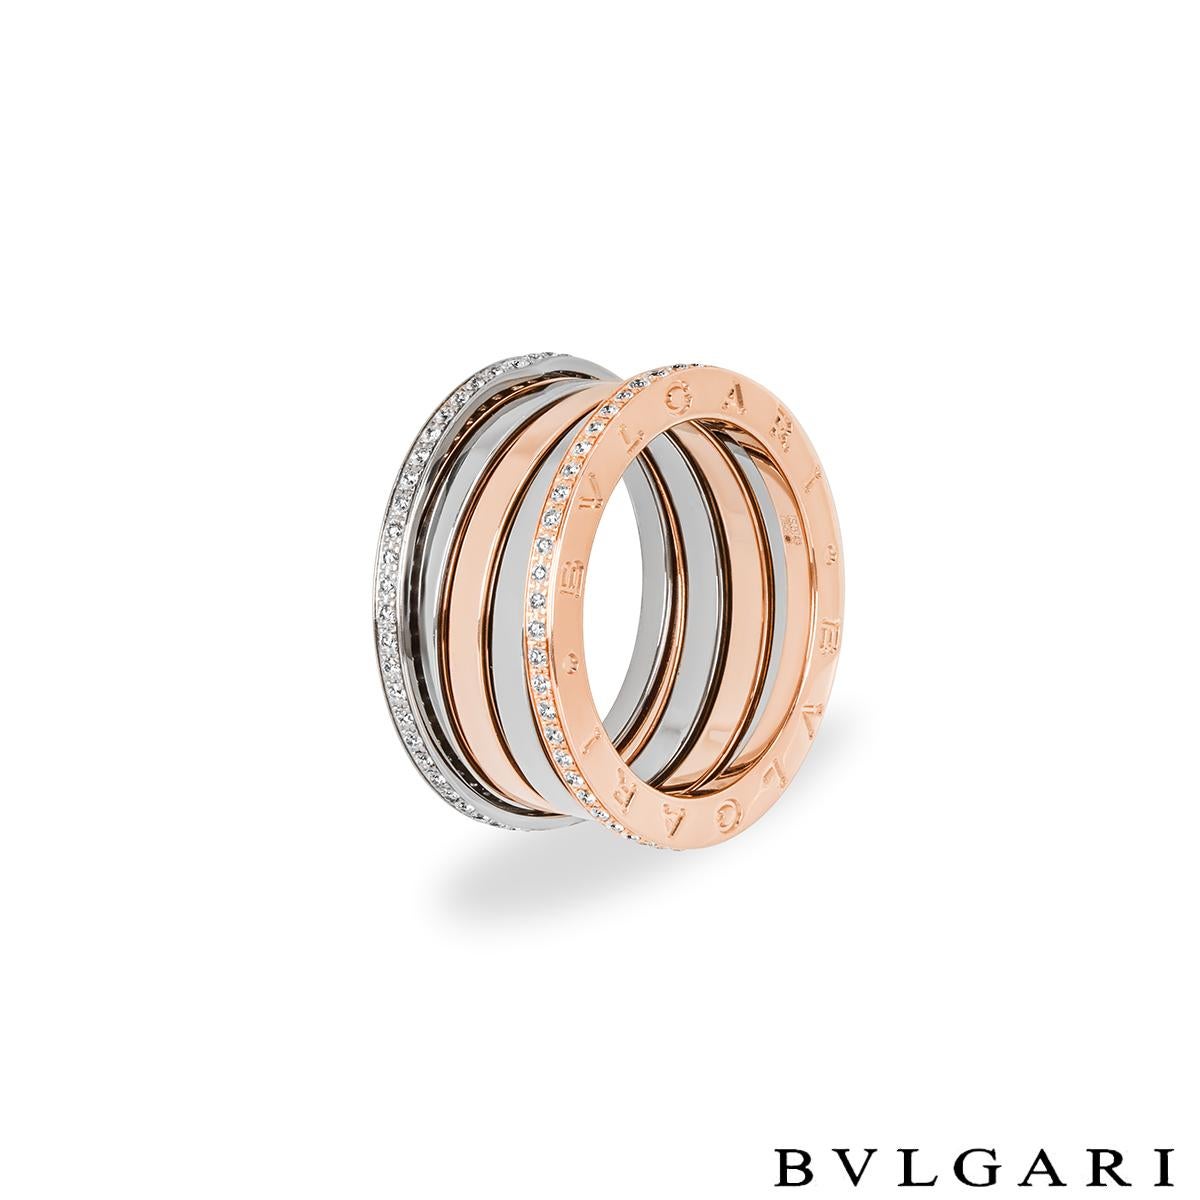 A striking 18k rose and white gold diamond ring by Bvlgari from their Labyrinth B.Zero1 collection. The ring comprises of the signature spirals, alternating between rose and white gold and accompanied by a diamond set border. There are 108 round